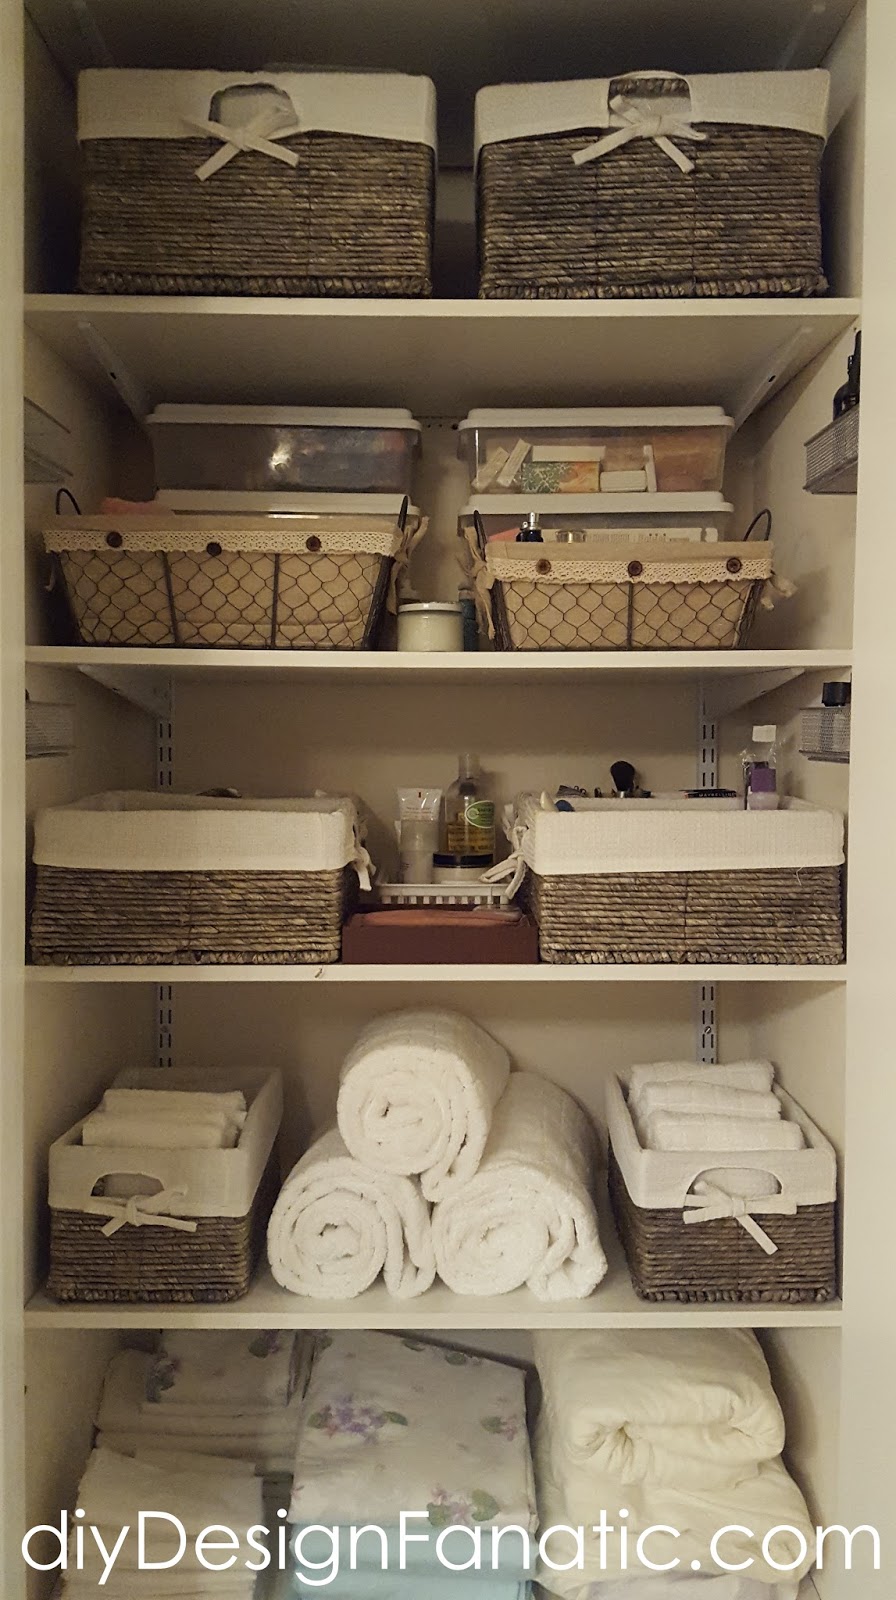 I had a big chunk of time, so I organized the linen closet in one day ...